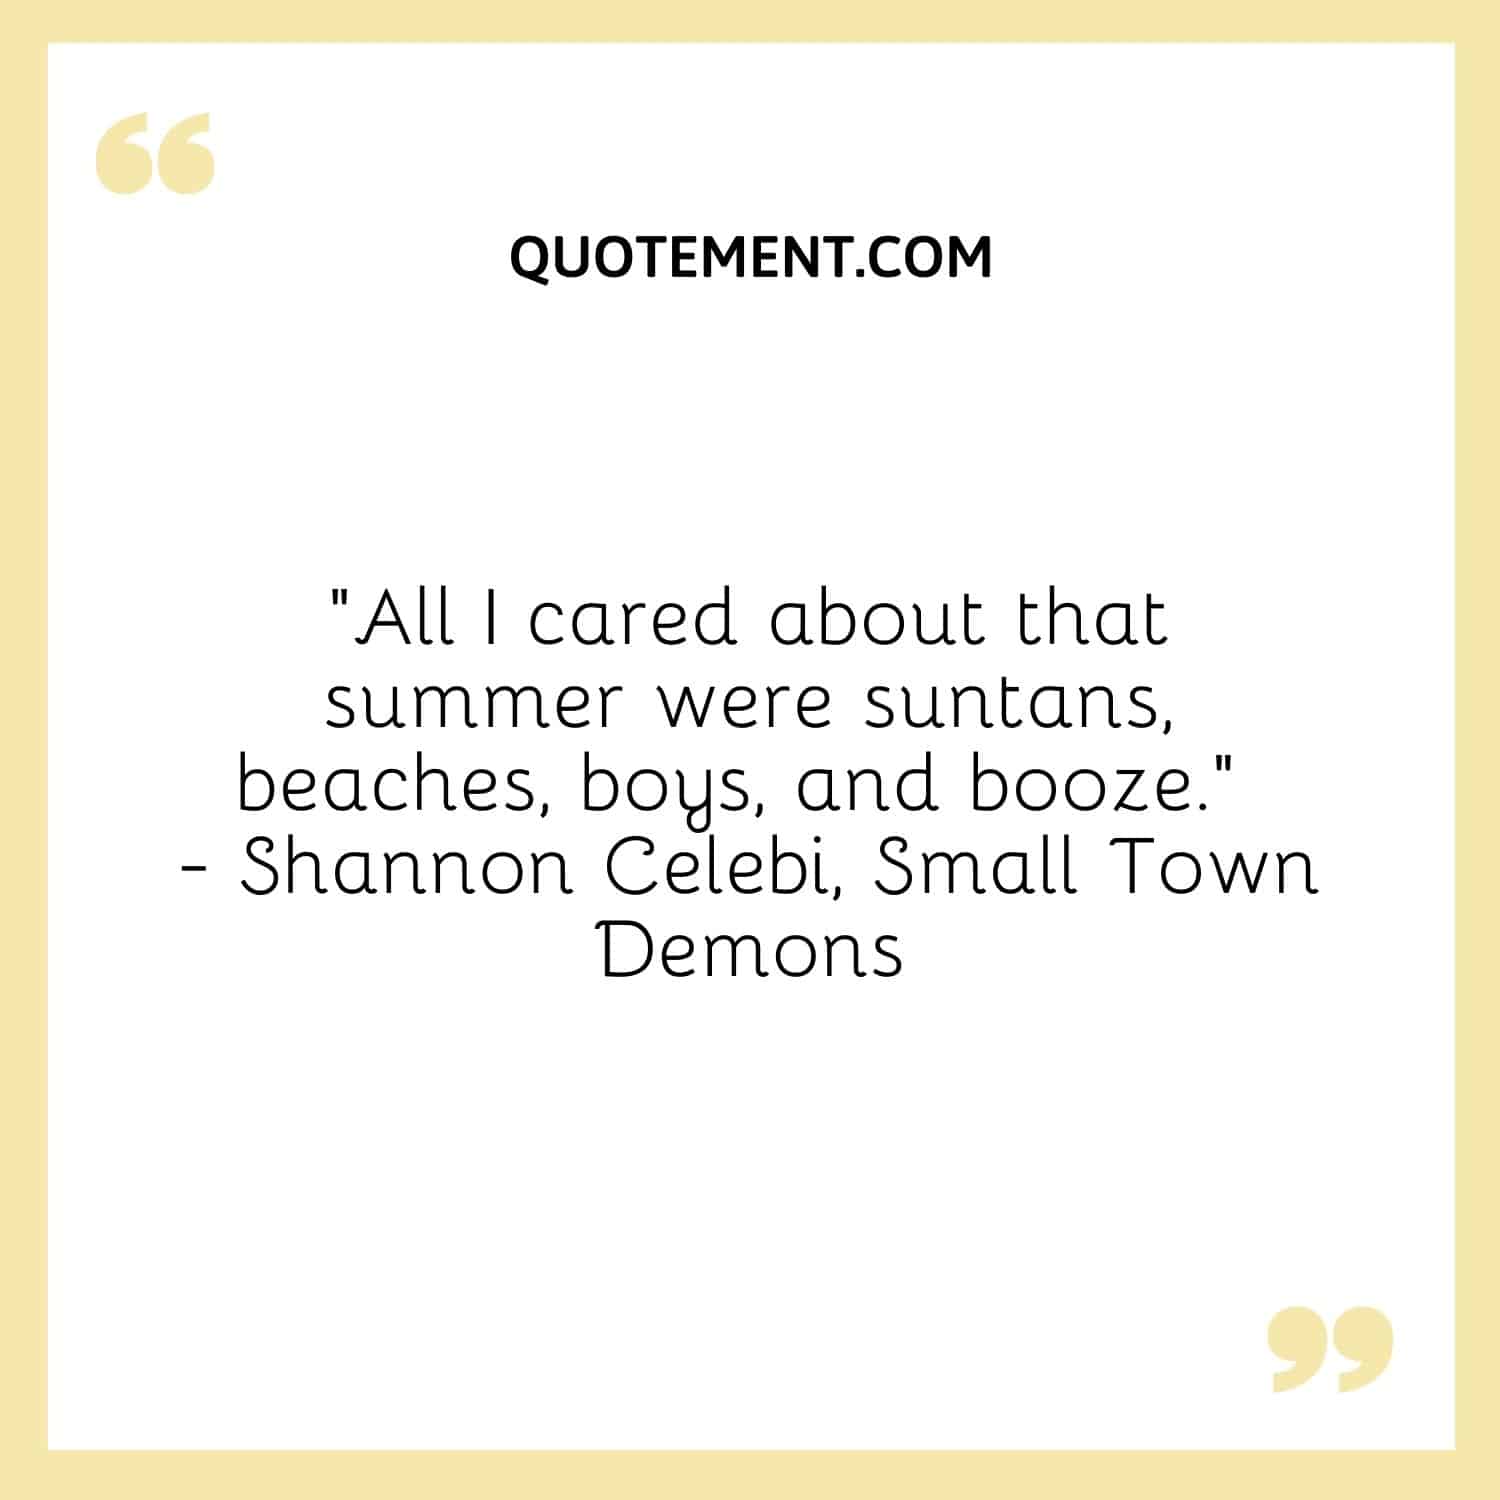 All I cared about that summer were suntans, beaches, boys, and booze. — Shannon Celebi, Small Town Demons